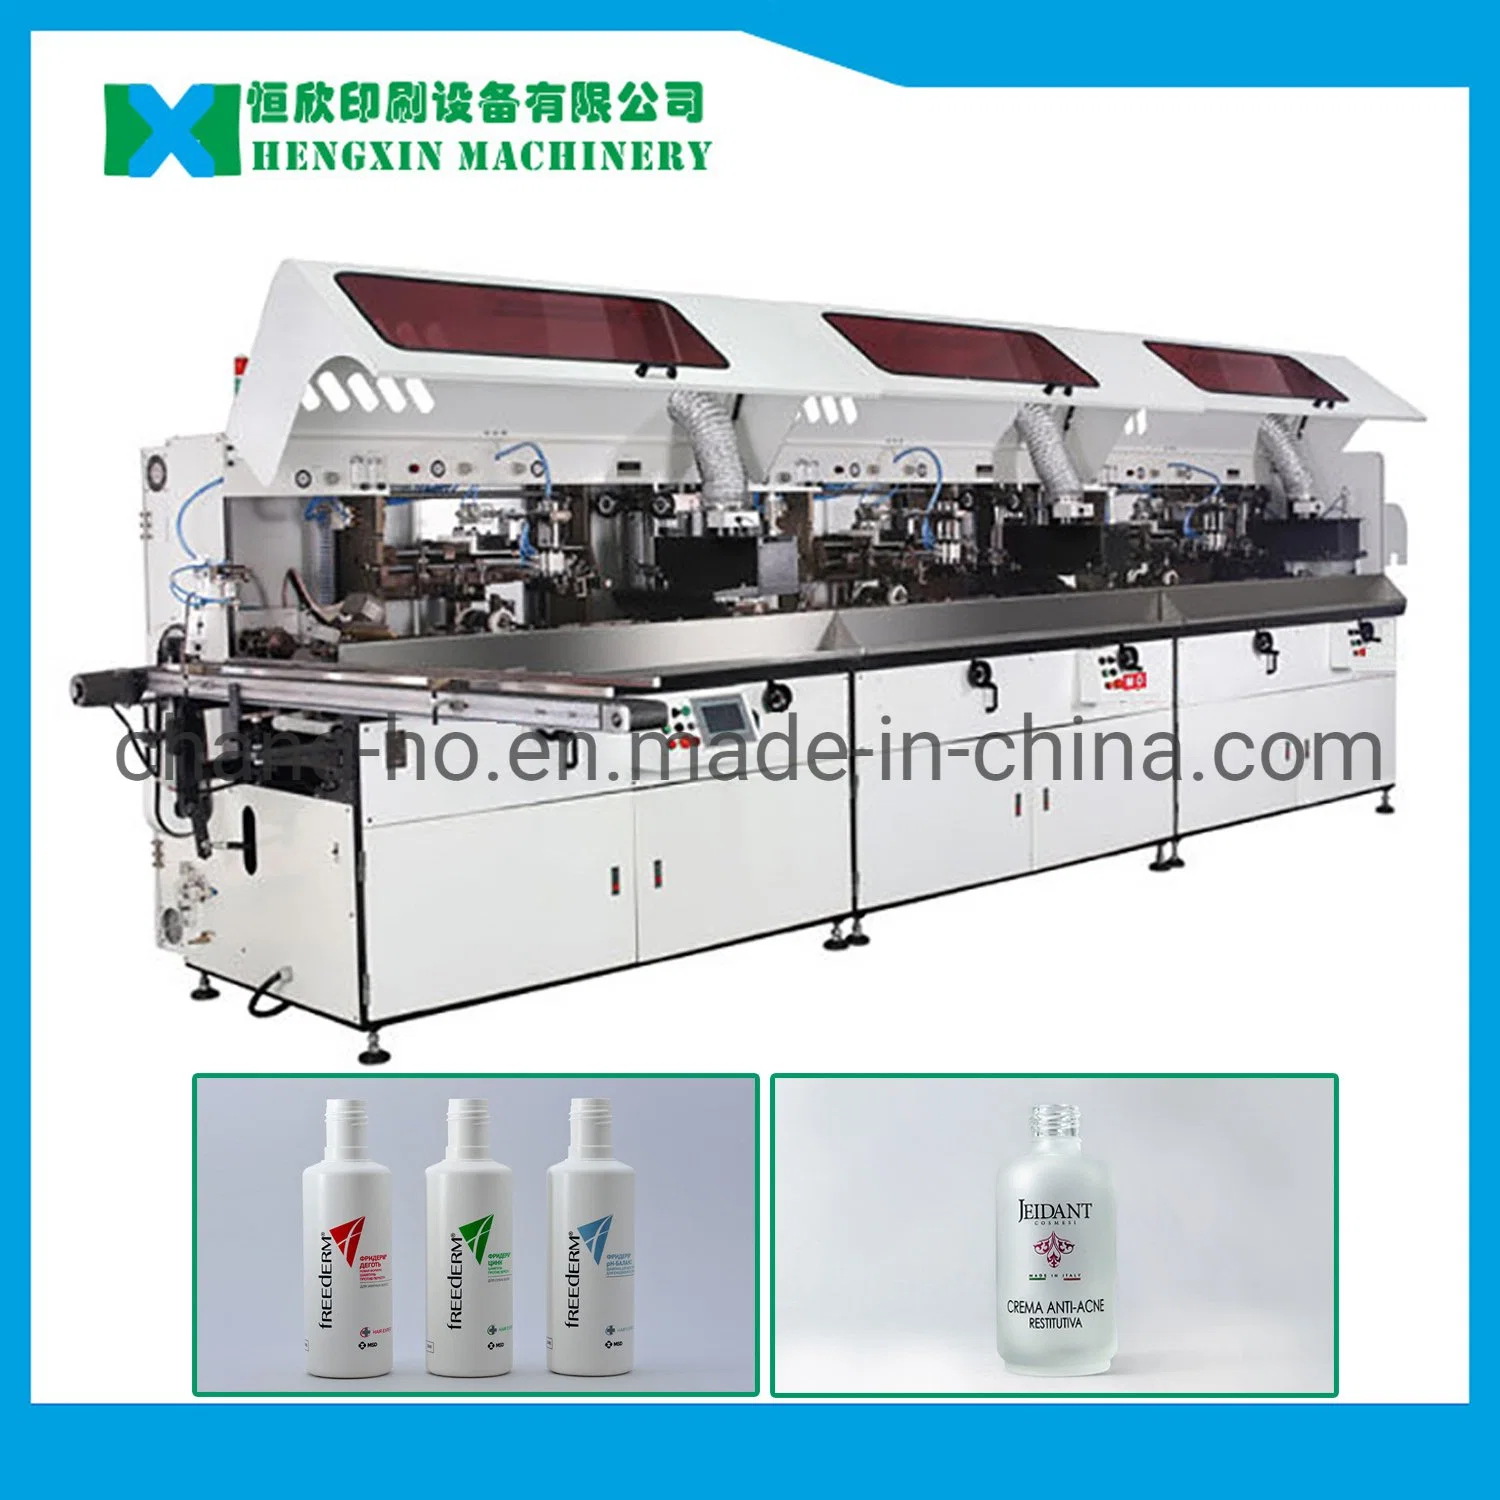 Full Automatic Multi-Color Silk Screen Printing Production Line for Plastic / Glass Bottles